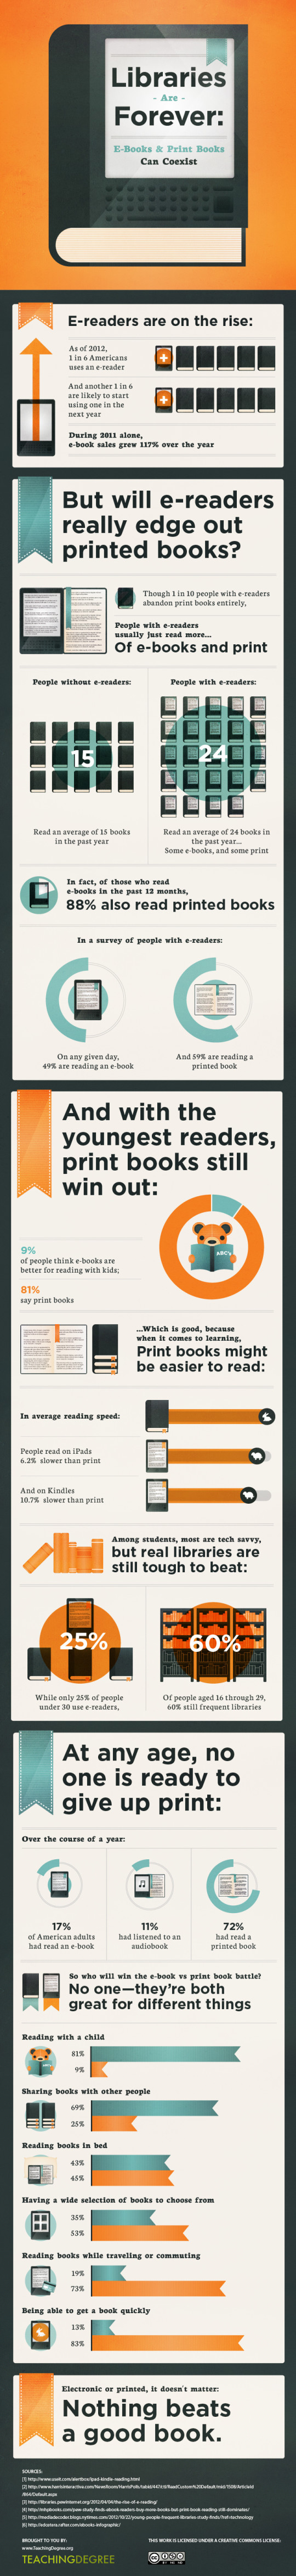 Libraries are forever - infographic